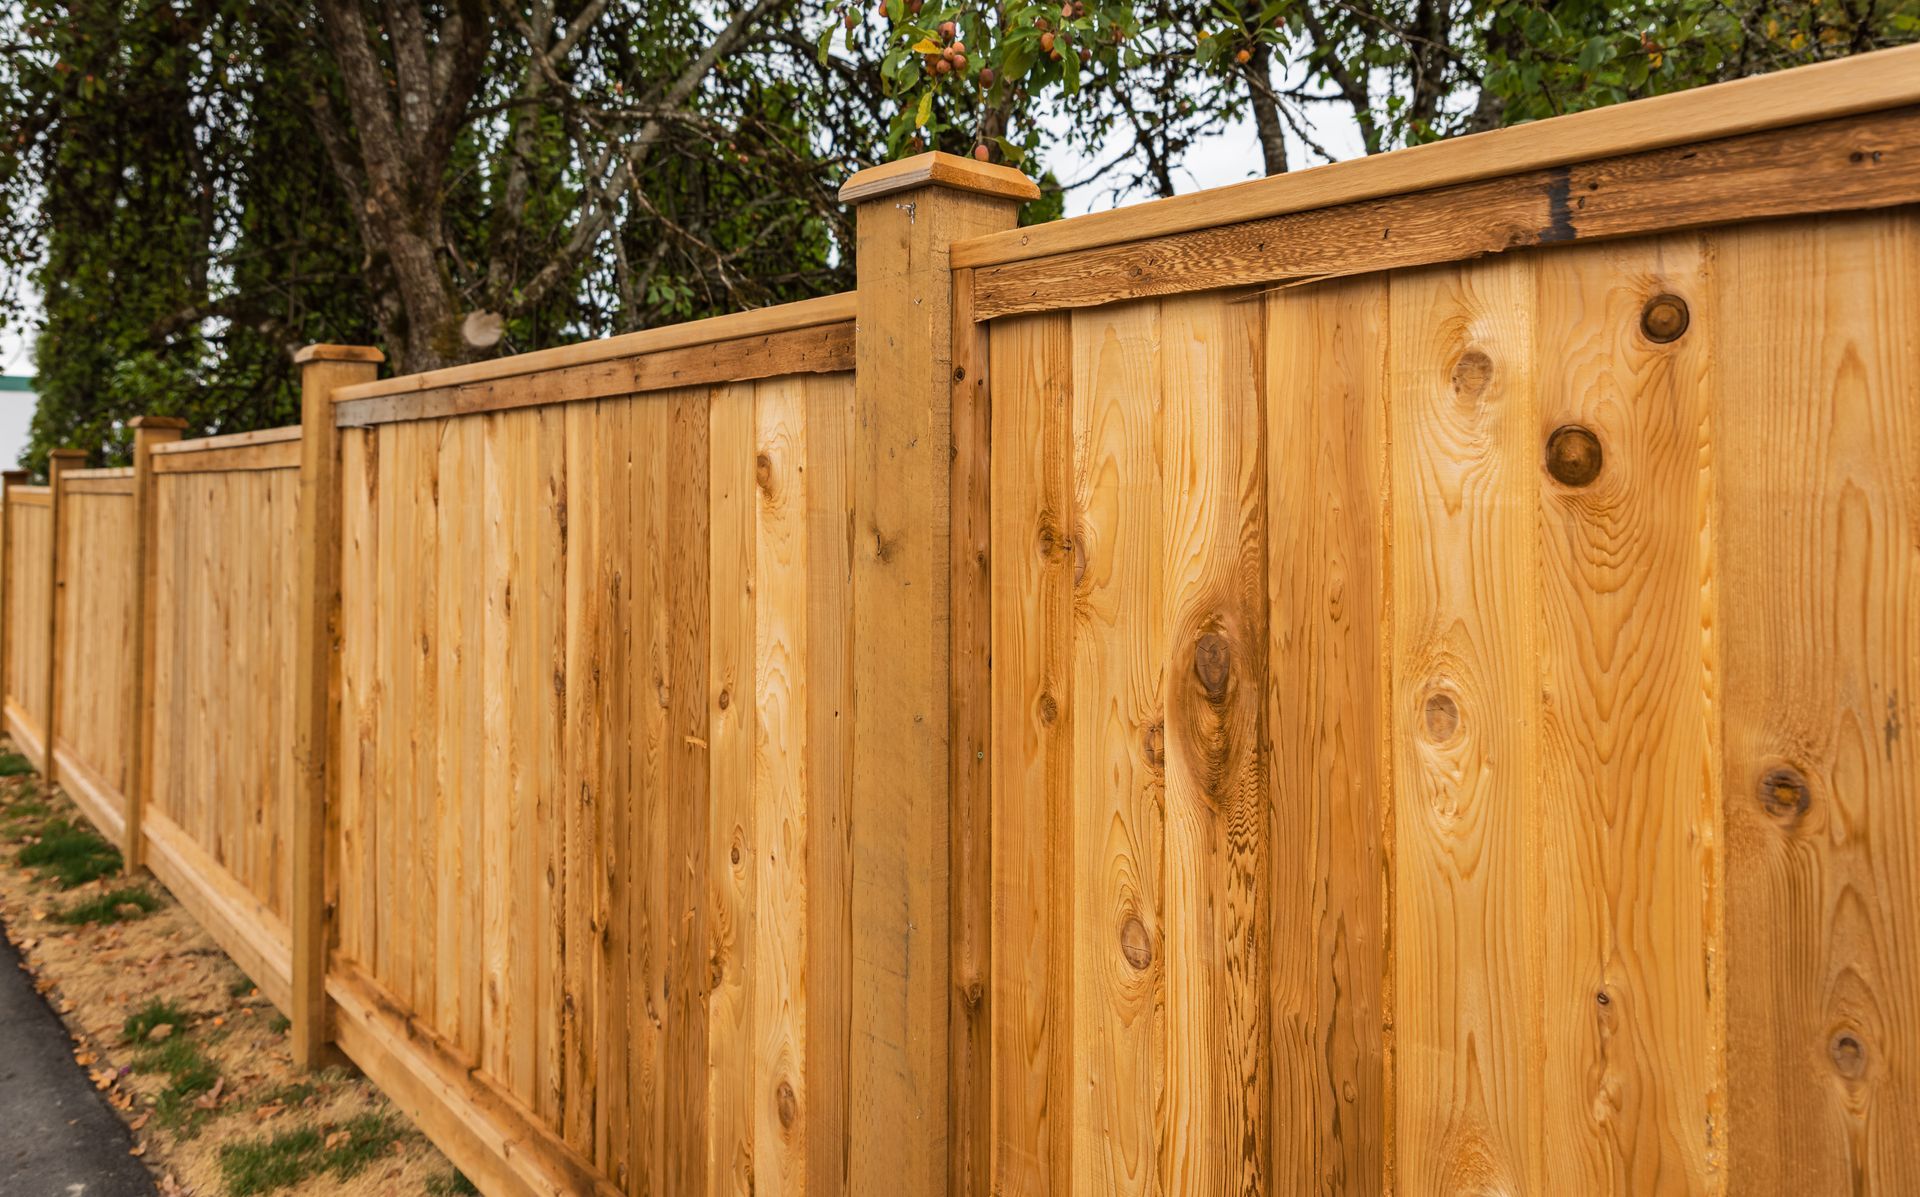 Freshly installed cedar wood fencing running along the yard, providing a natural and appealing boundary.